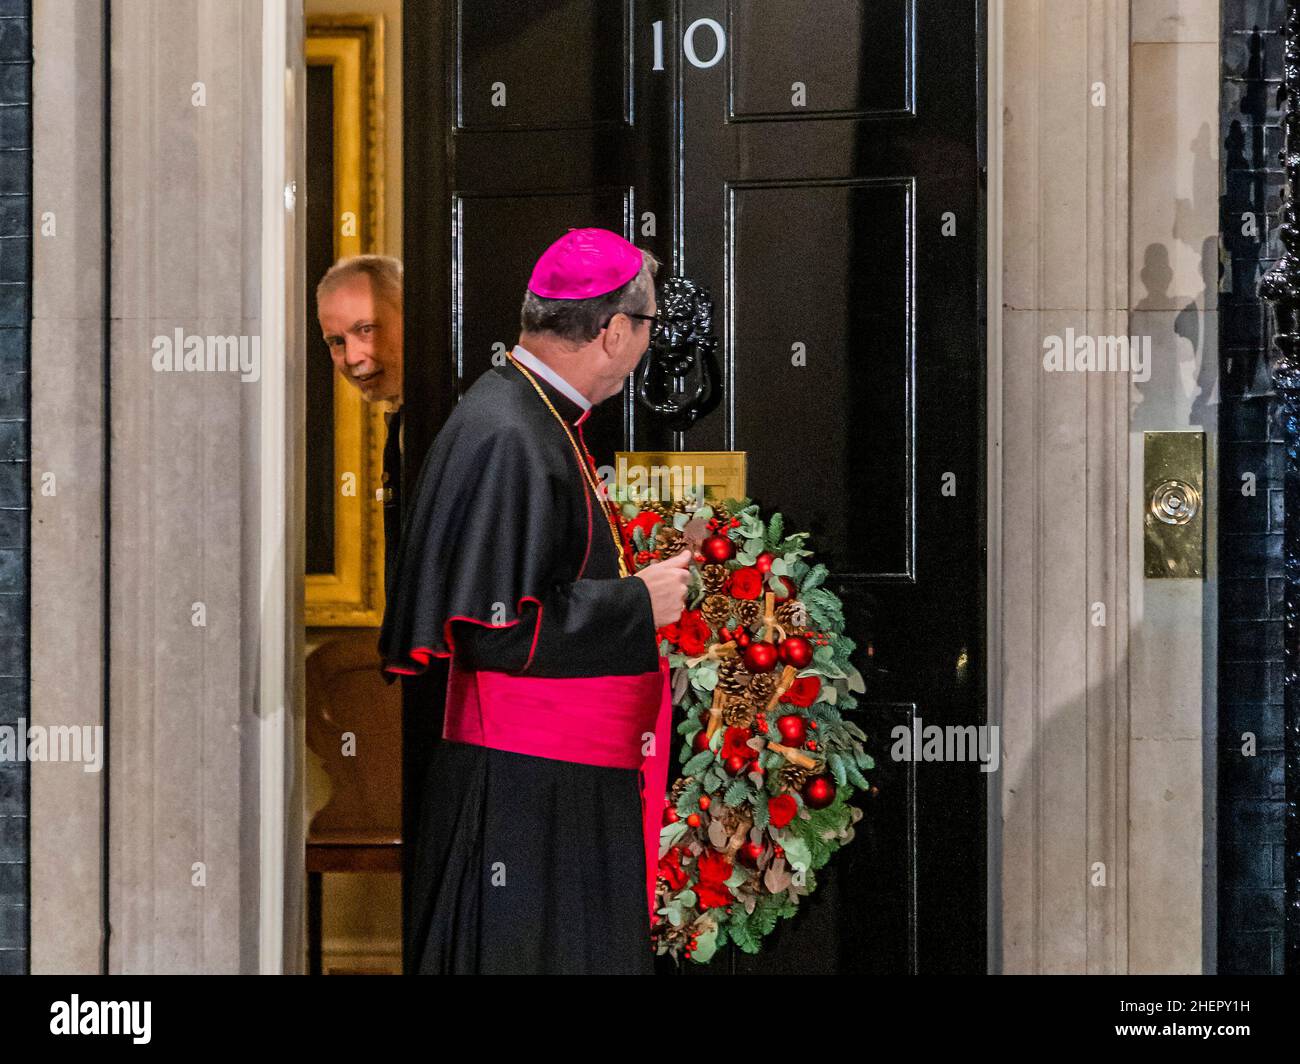 London, UK. 1st Dec, 2021. A priest arrives at the door of Number 10 Downing Street. Credit: Guy Bell/Alamy Live News Stock Photo